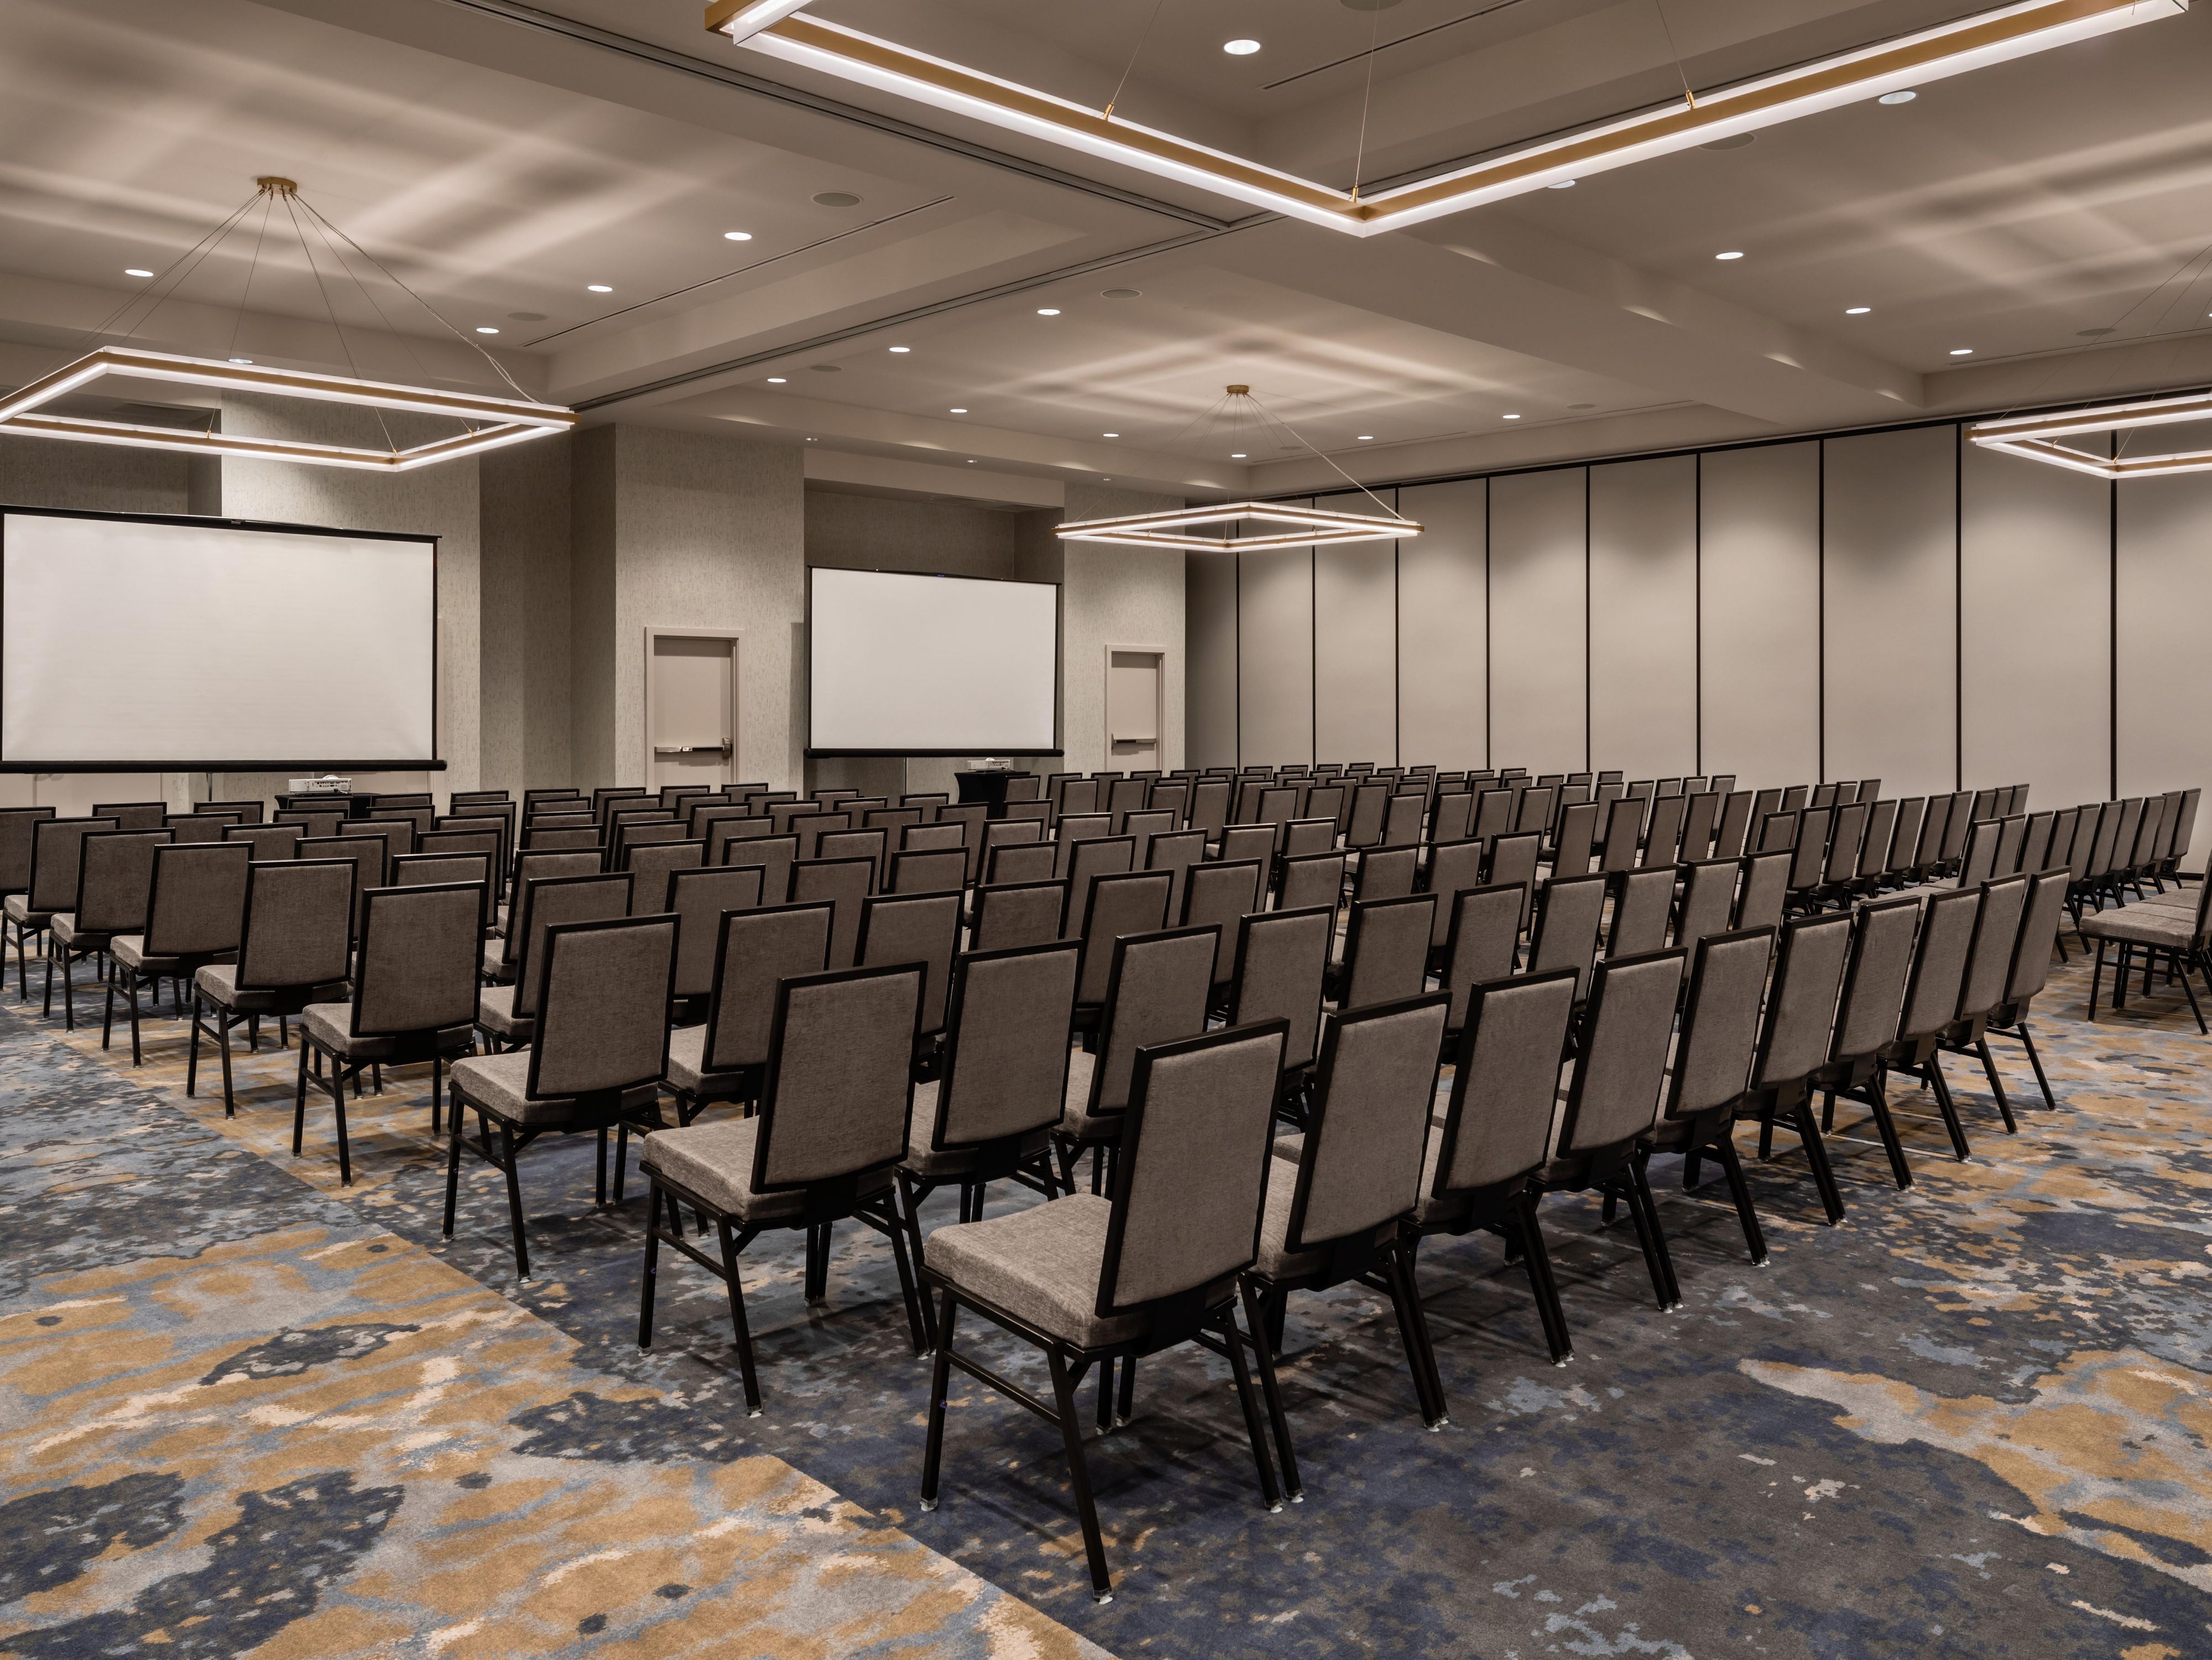 Host your next event in our hotel's flexible meeting space with over 10,000 square feet. All rooms feature audiovisual technology to ensure successful meetings. Our ballroom opens up to an outdoor terrace and is the perfect place for military and government events. Our hotel's Meetings Director will help you plan an unforgettable event.
